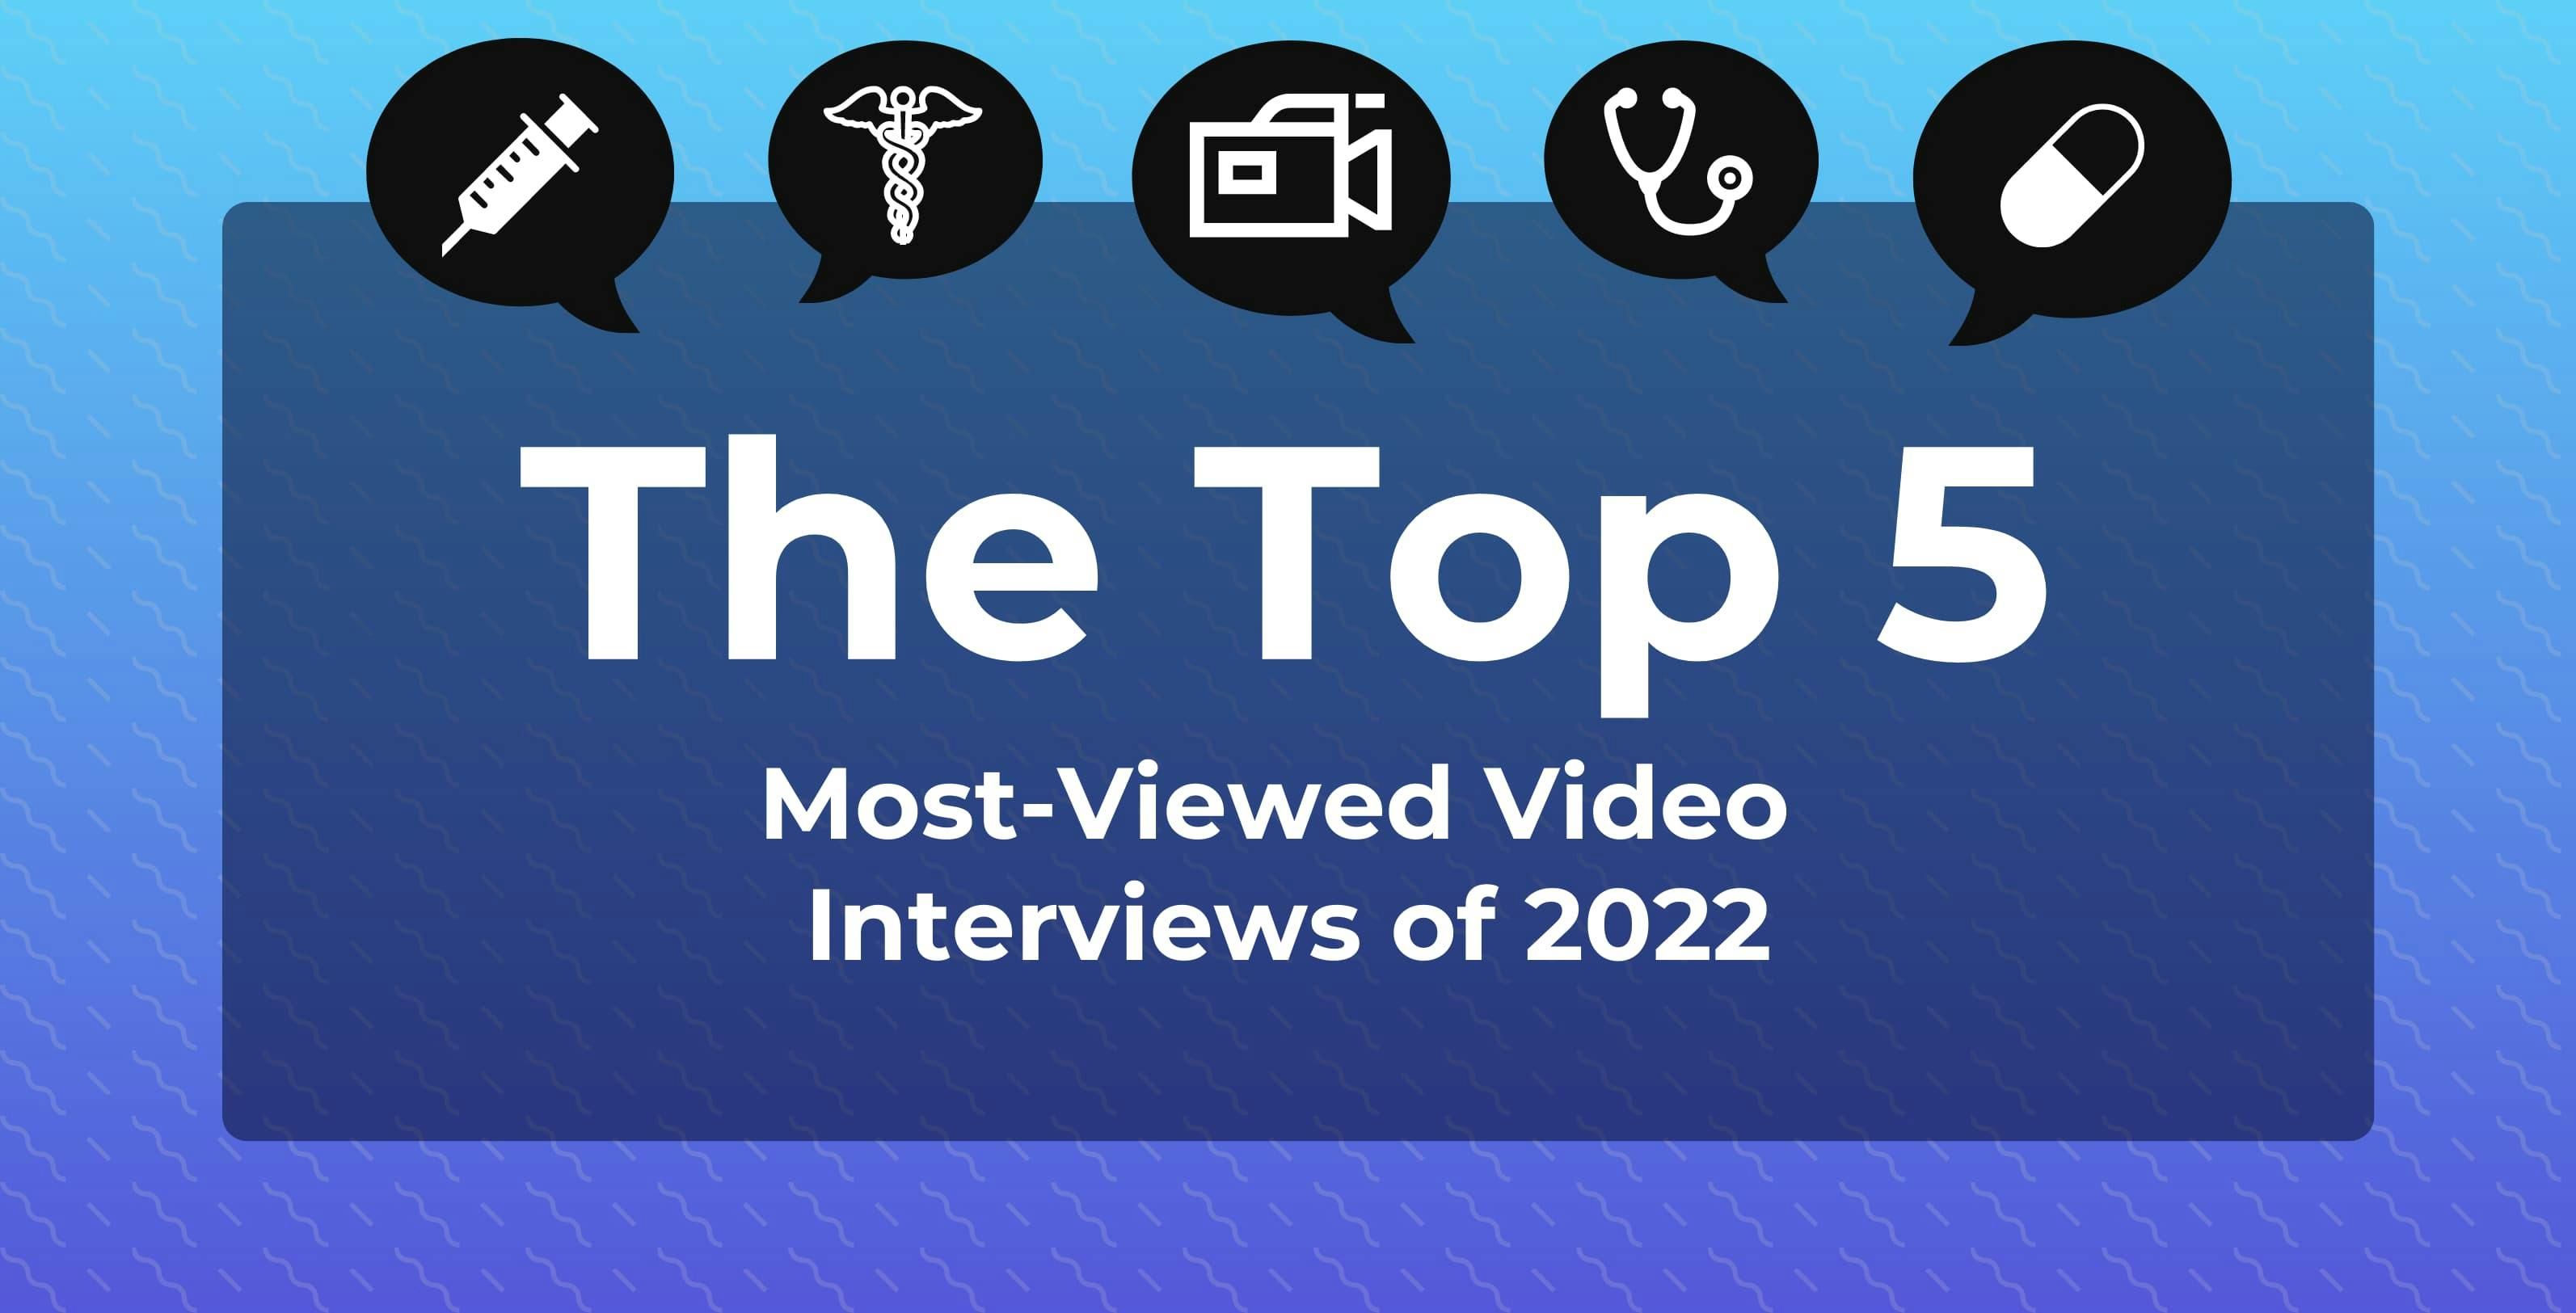 Top 5 Most-Viewed Video Interviews of 2022